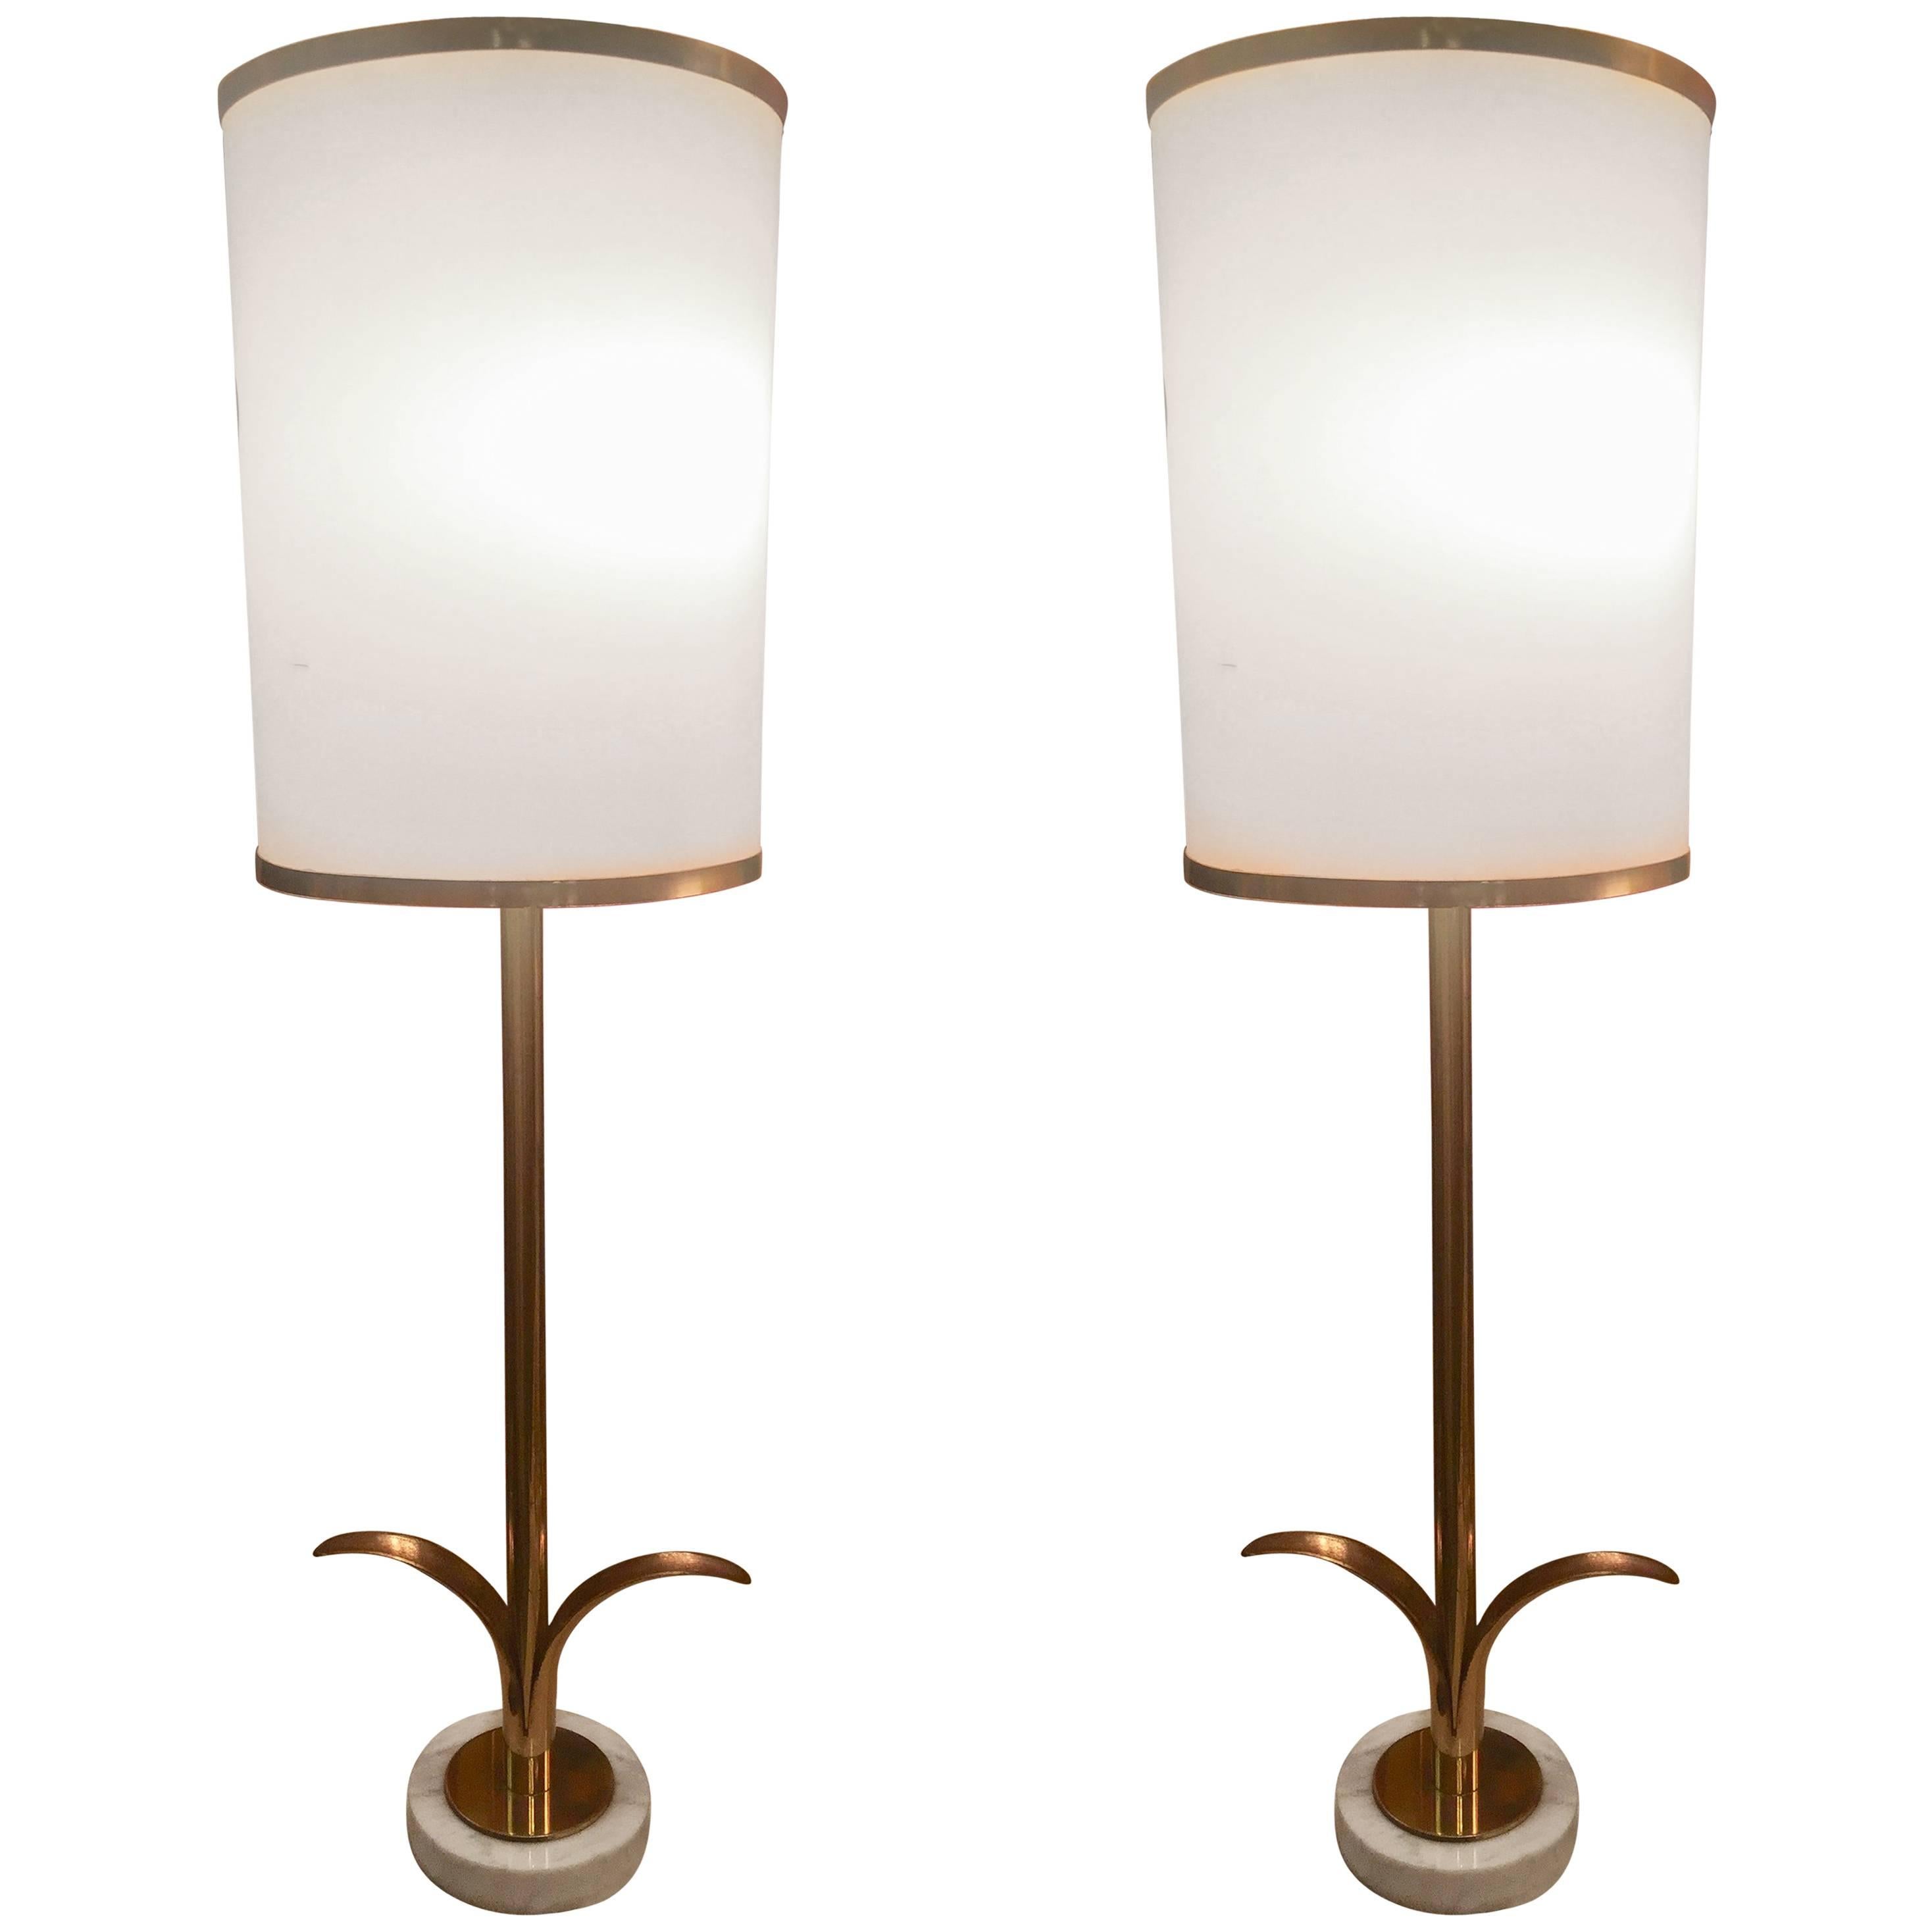 Pair of Paul Hanson Brass Candlestick Table Lamps